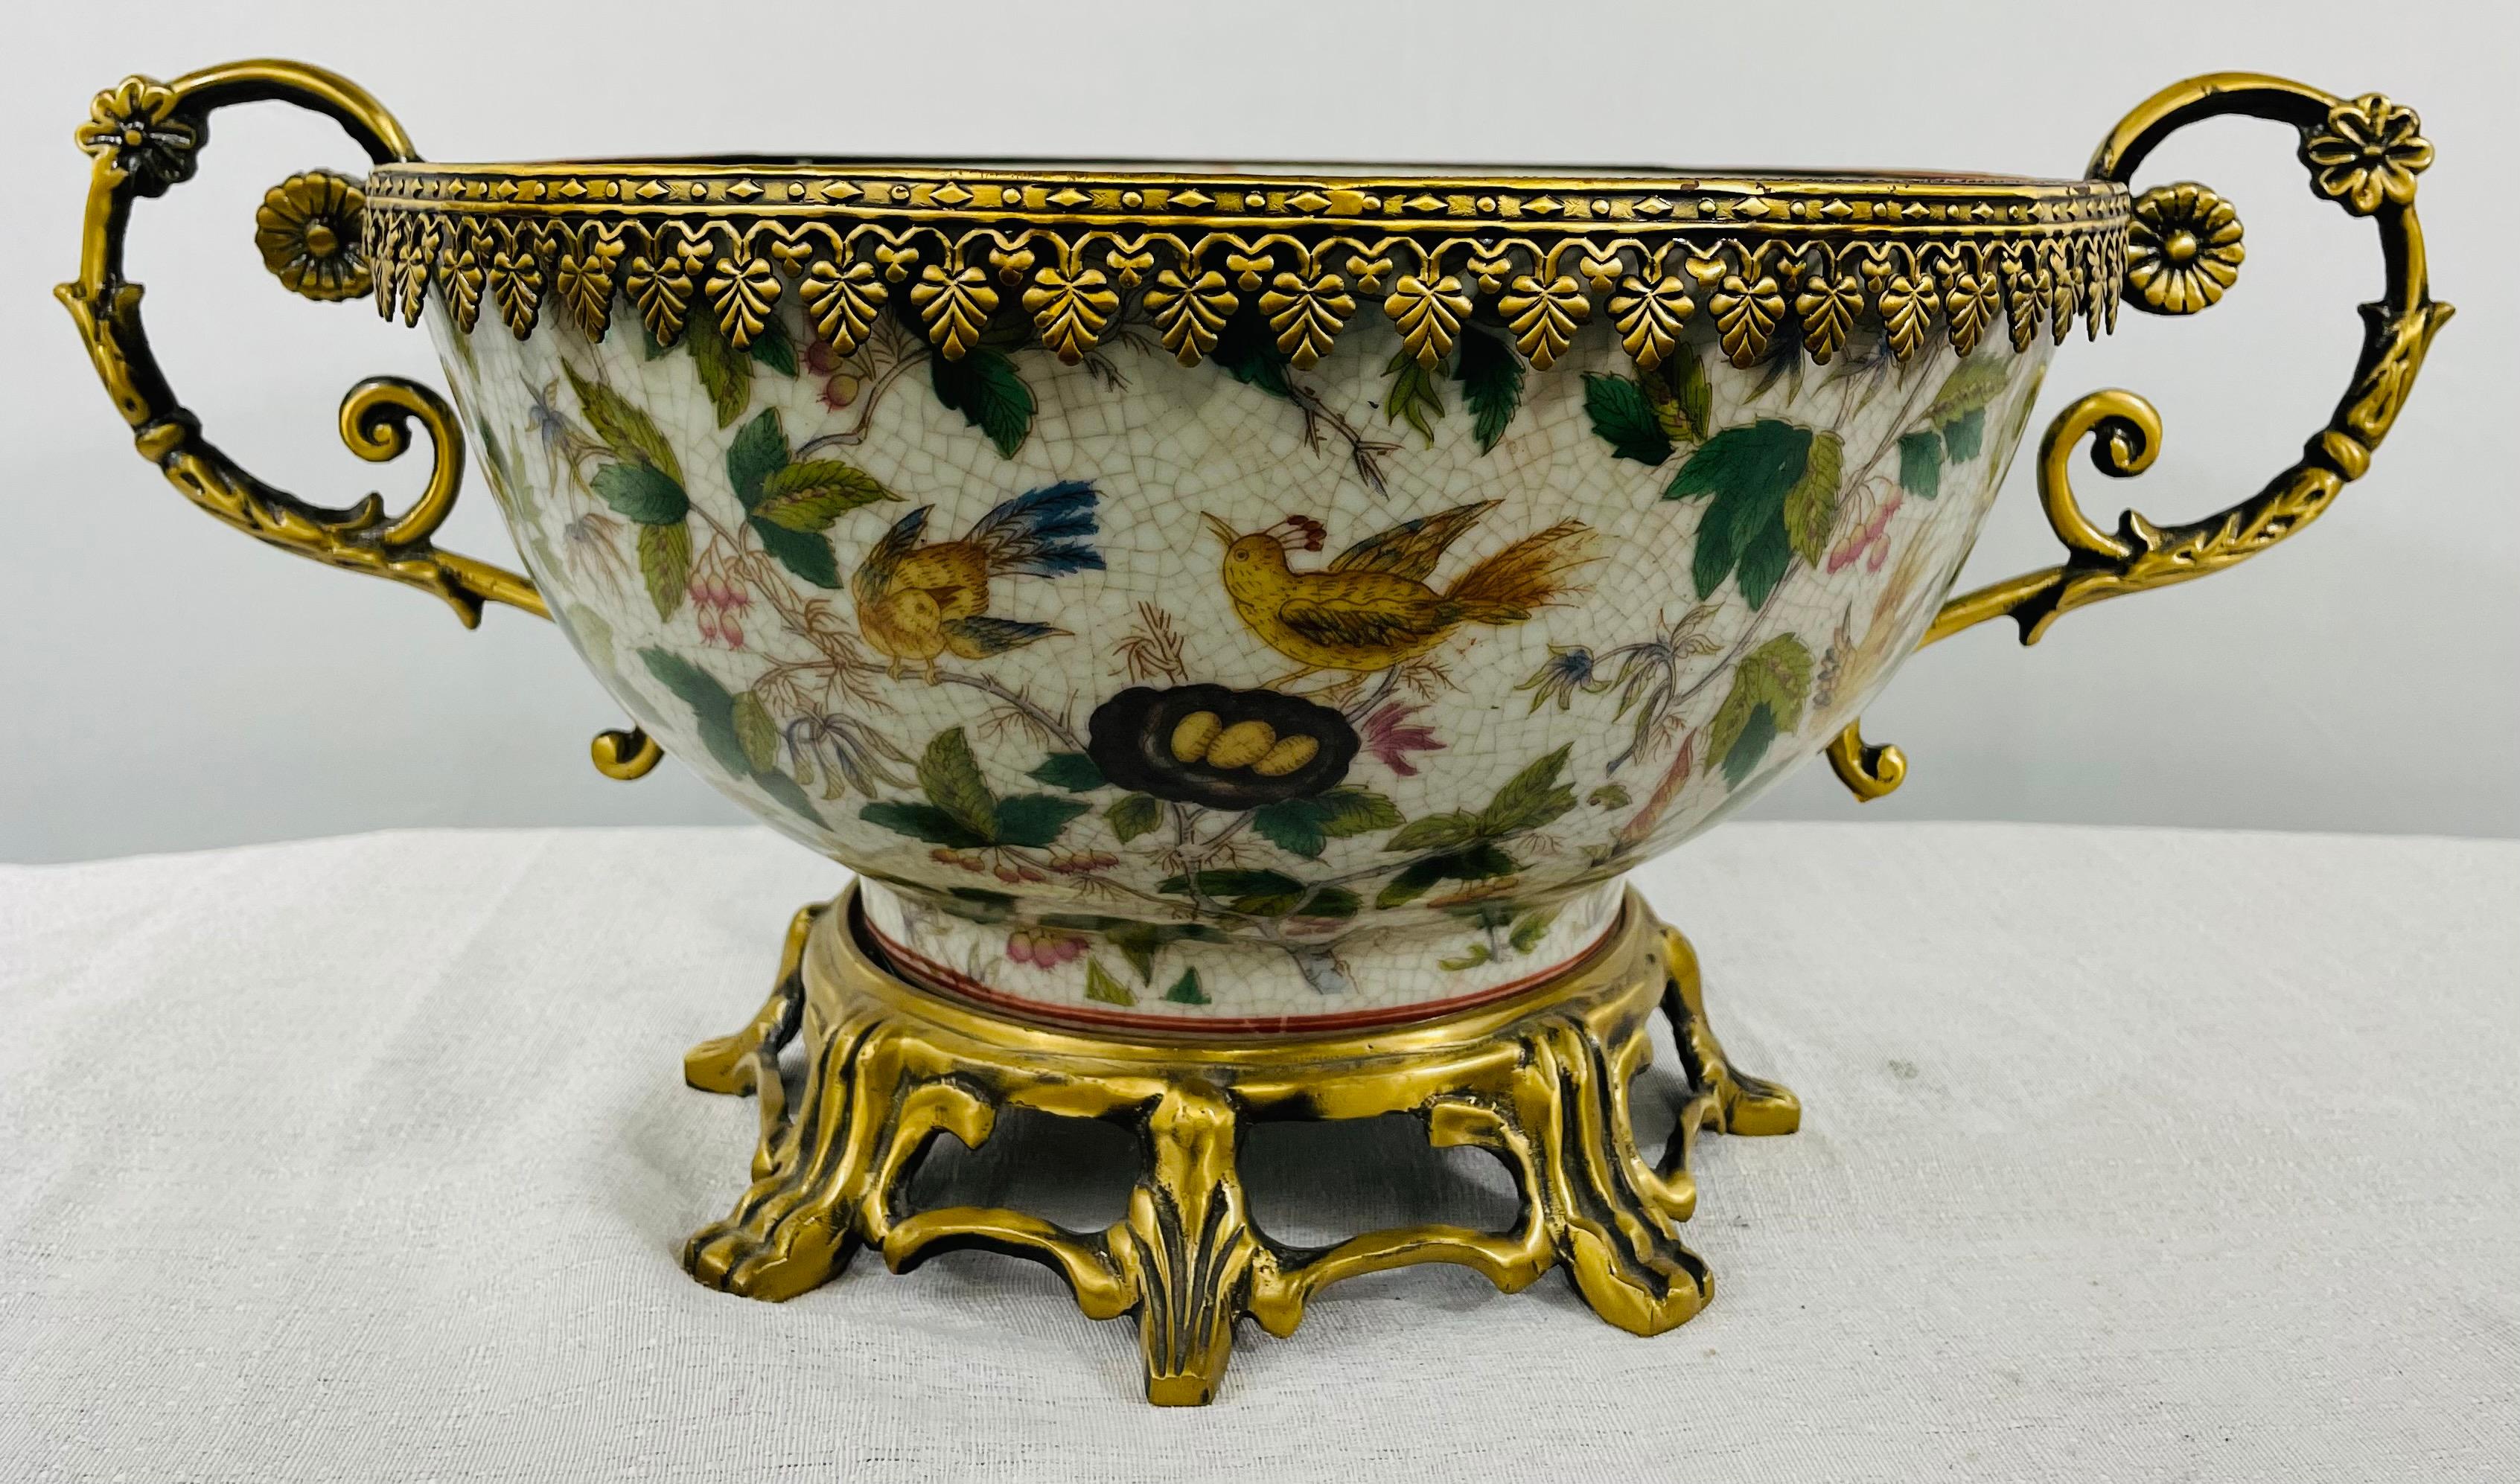 An exquisite Louis XV style bronze mounted Chinese Export centerpiece bowl. The porcelain bowl is finely hand painted with exotic birds, dragon fruits and plants. The bowl features two bronze handles with floral design, a rim in acanthus motifs and